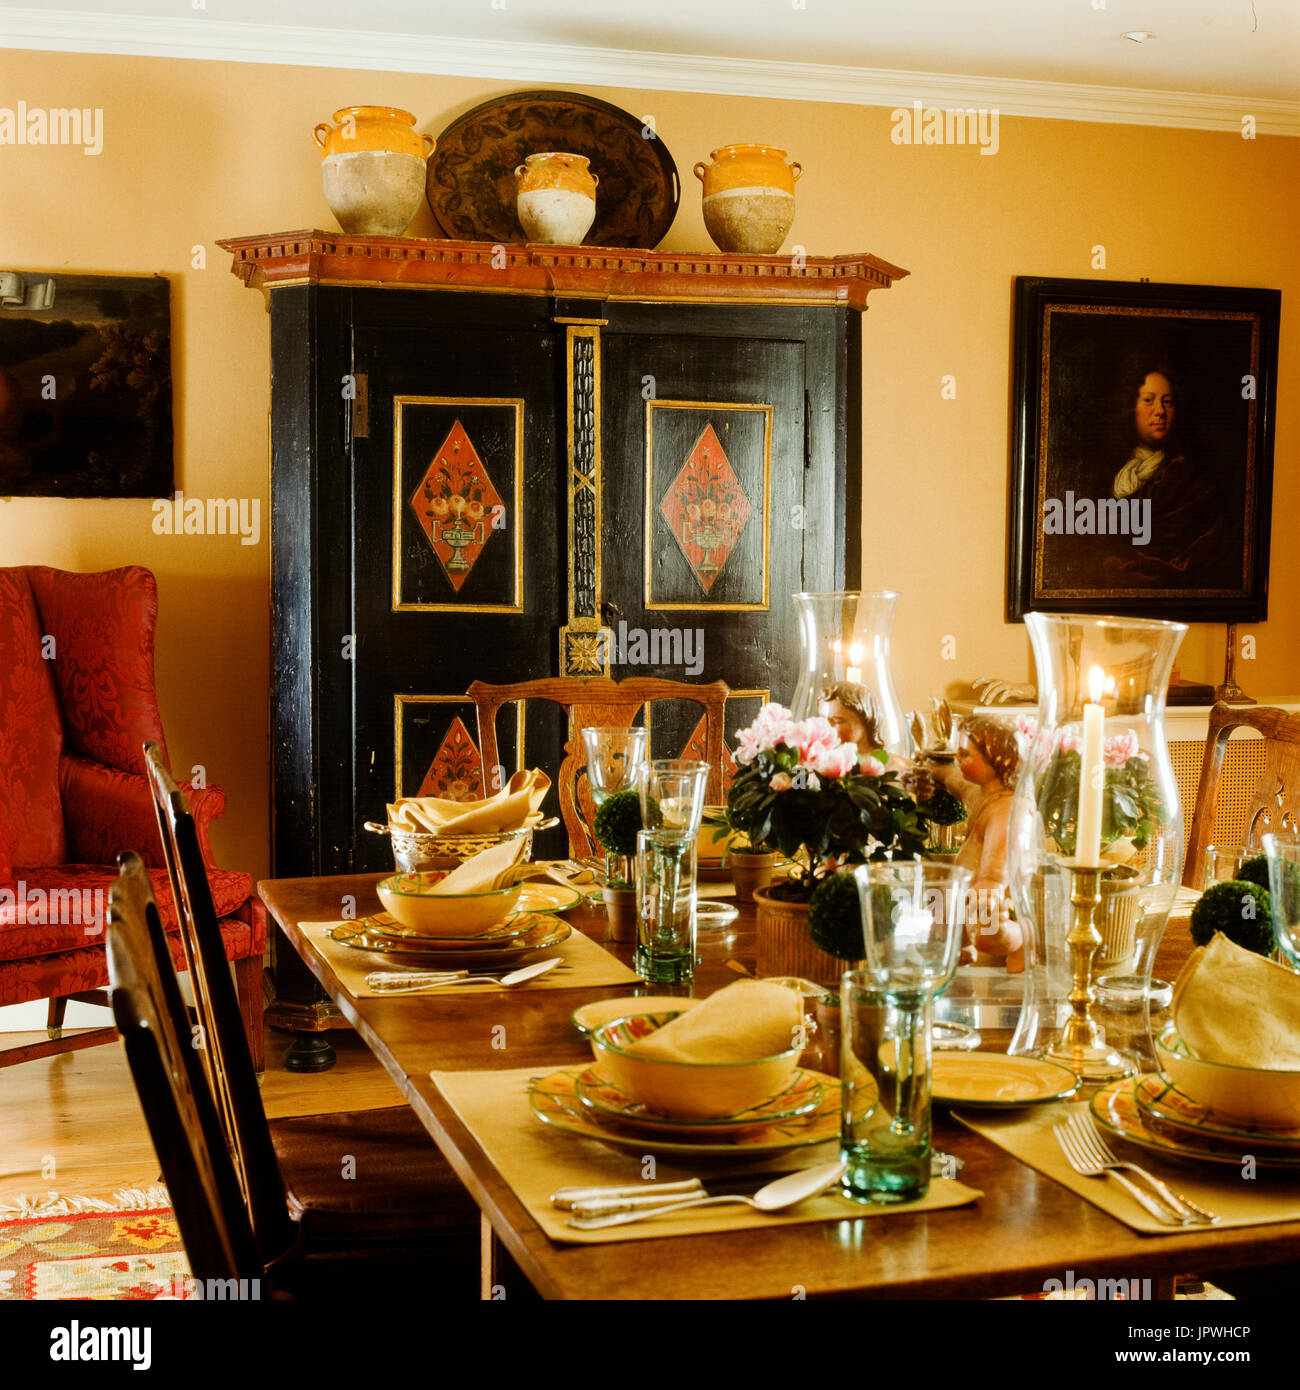 20 of the Best Dining Rooms on Houzz India